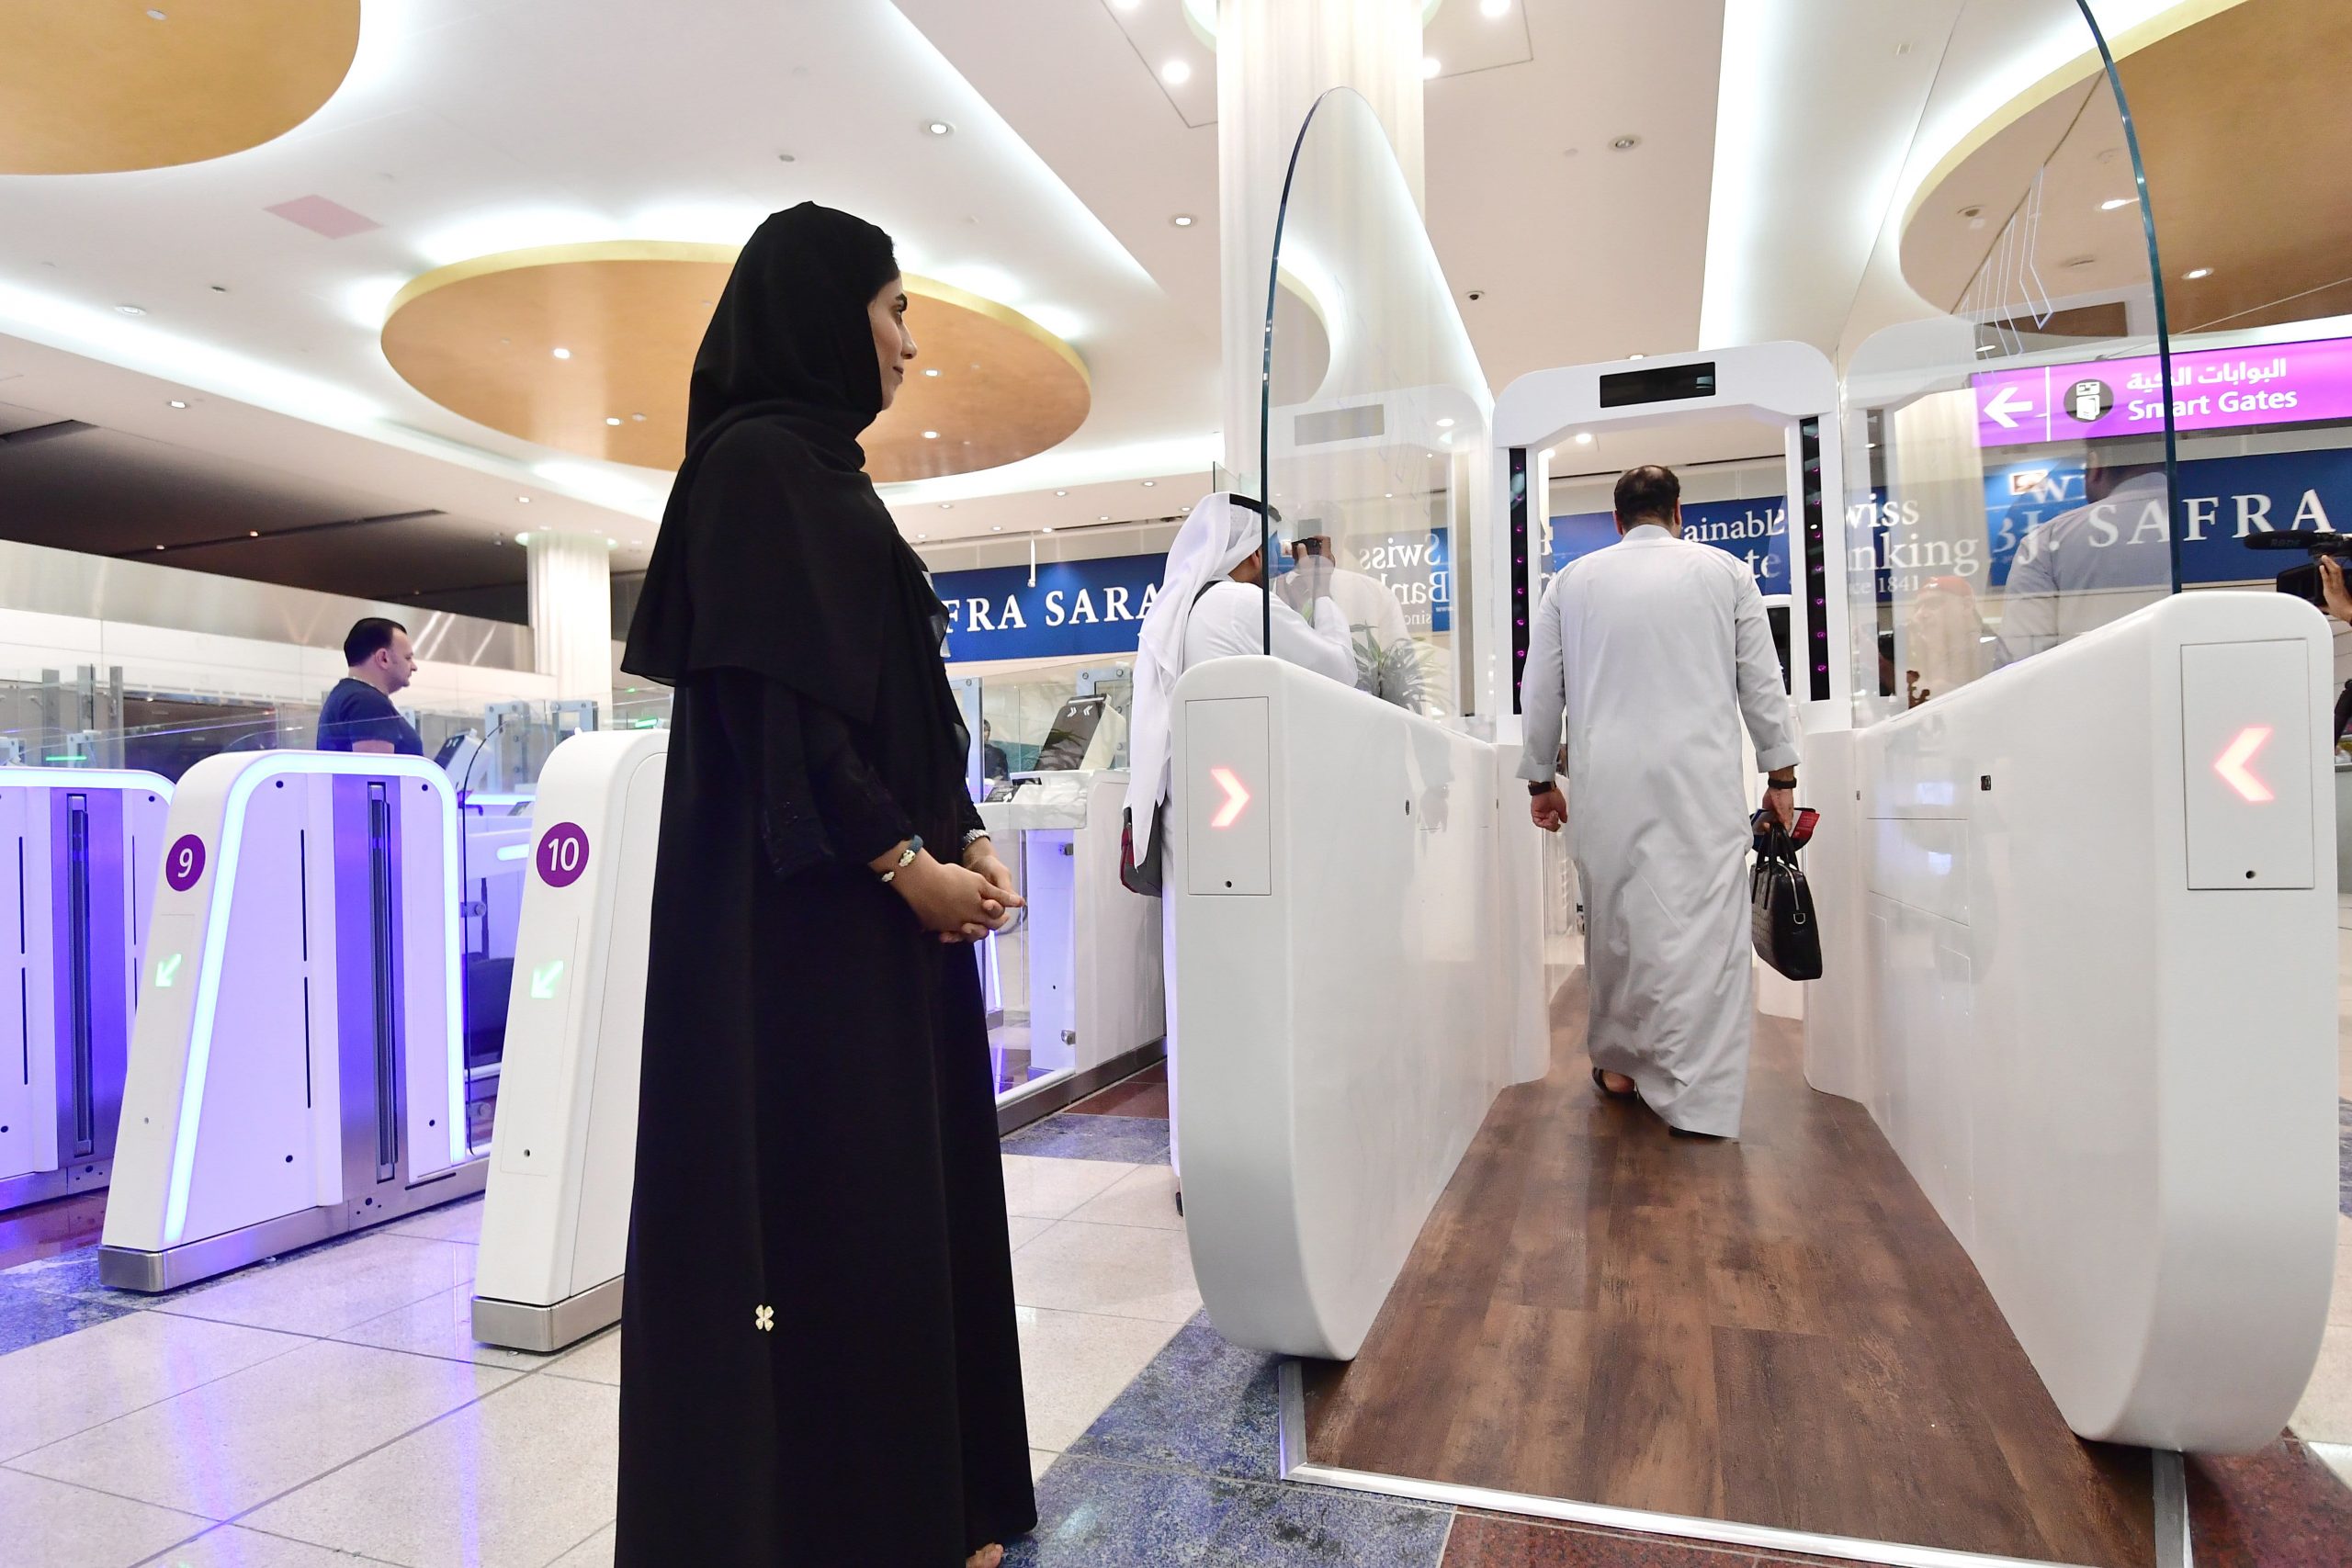 Dubai providing Pfizer, Sinopharm Covid vaccines to residents without cost